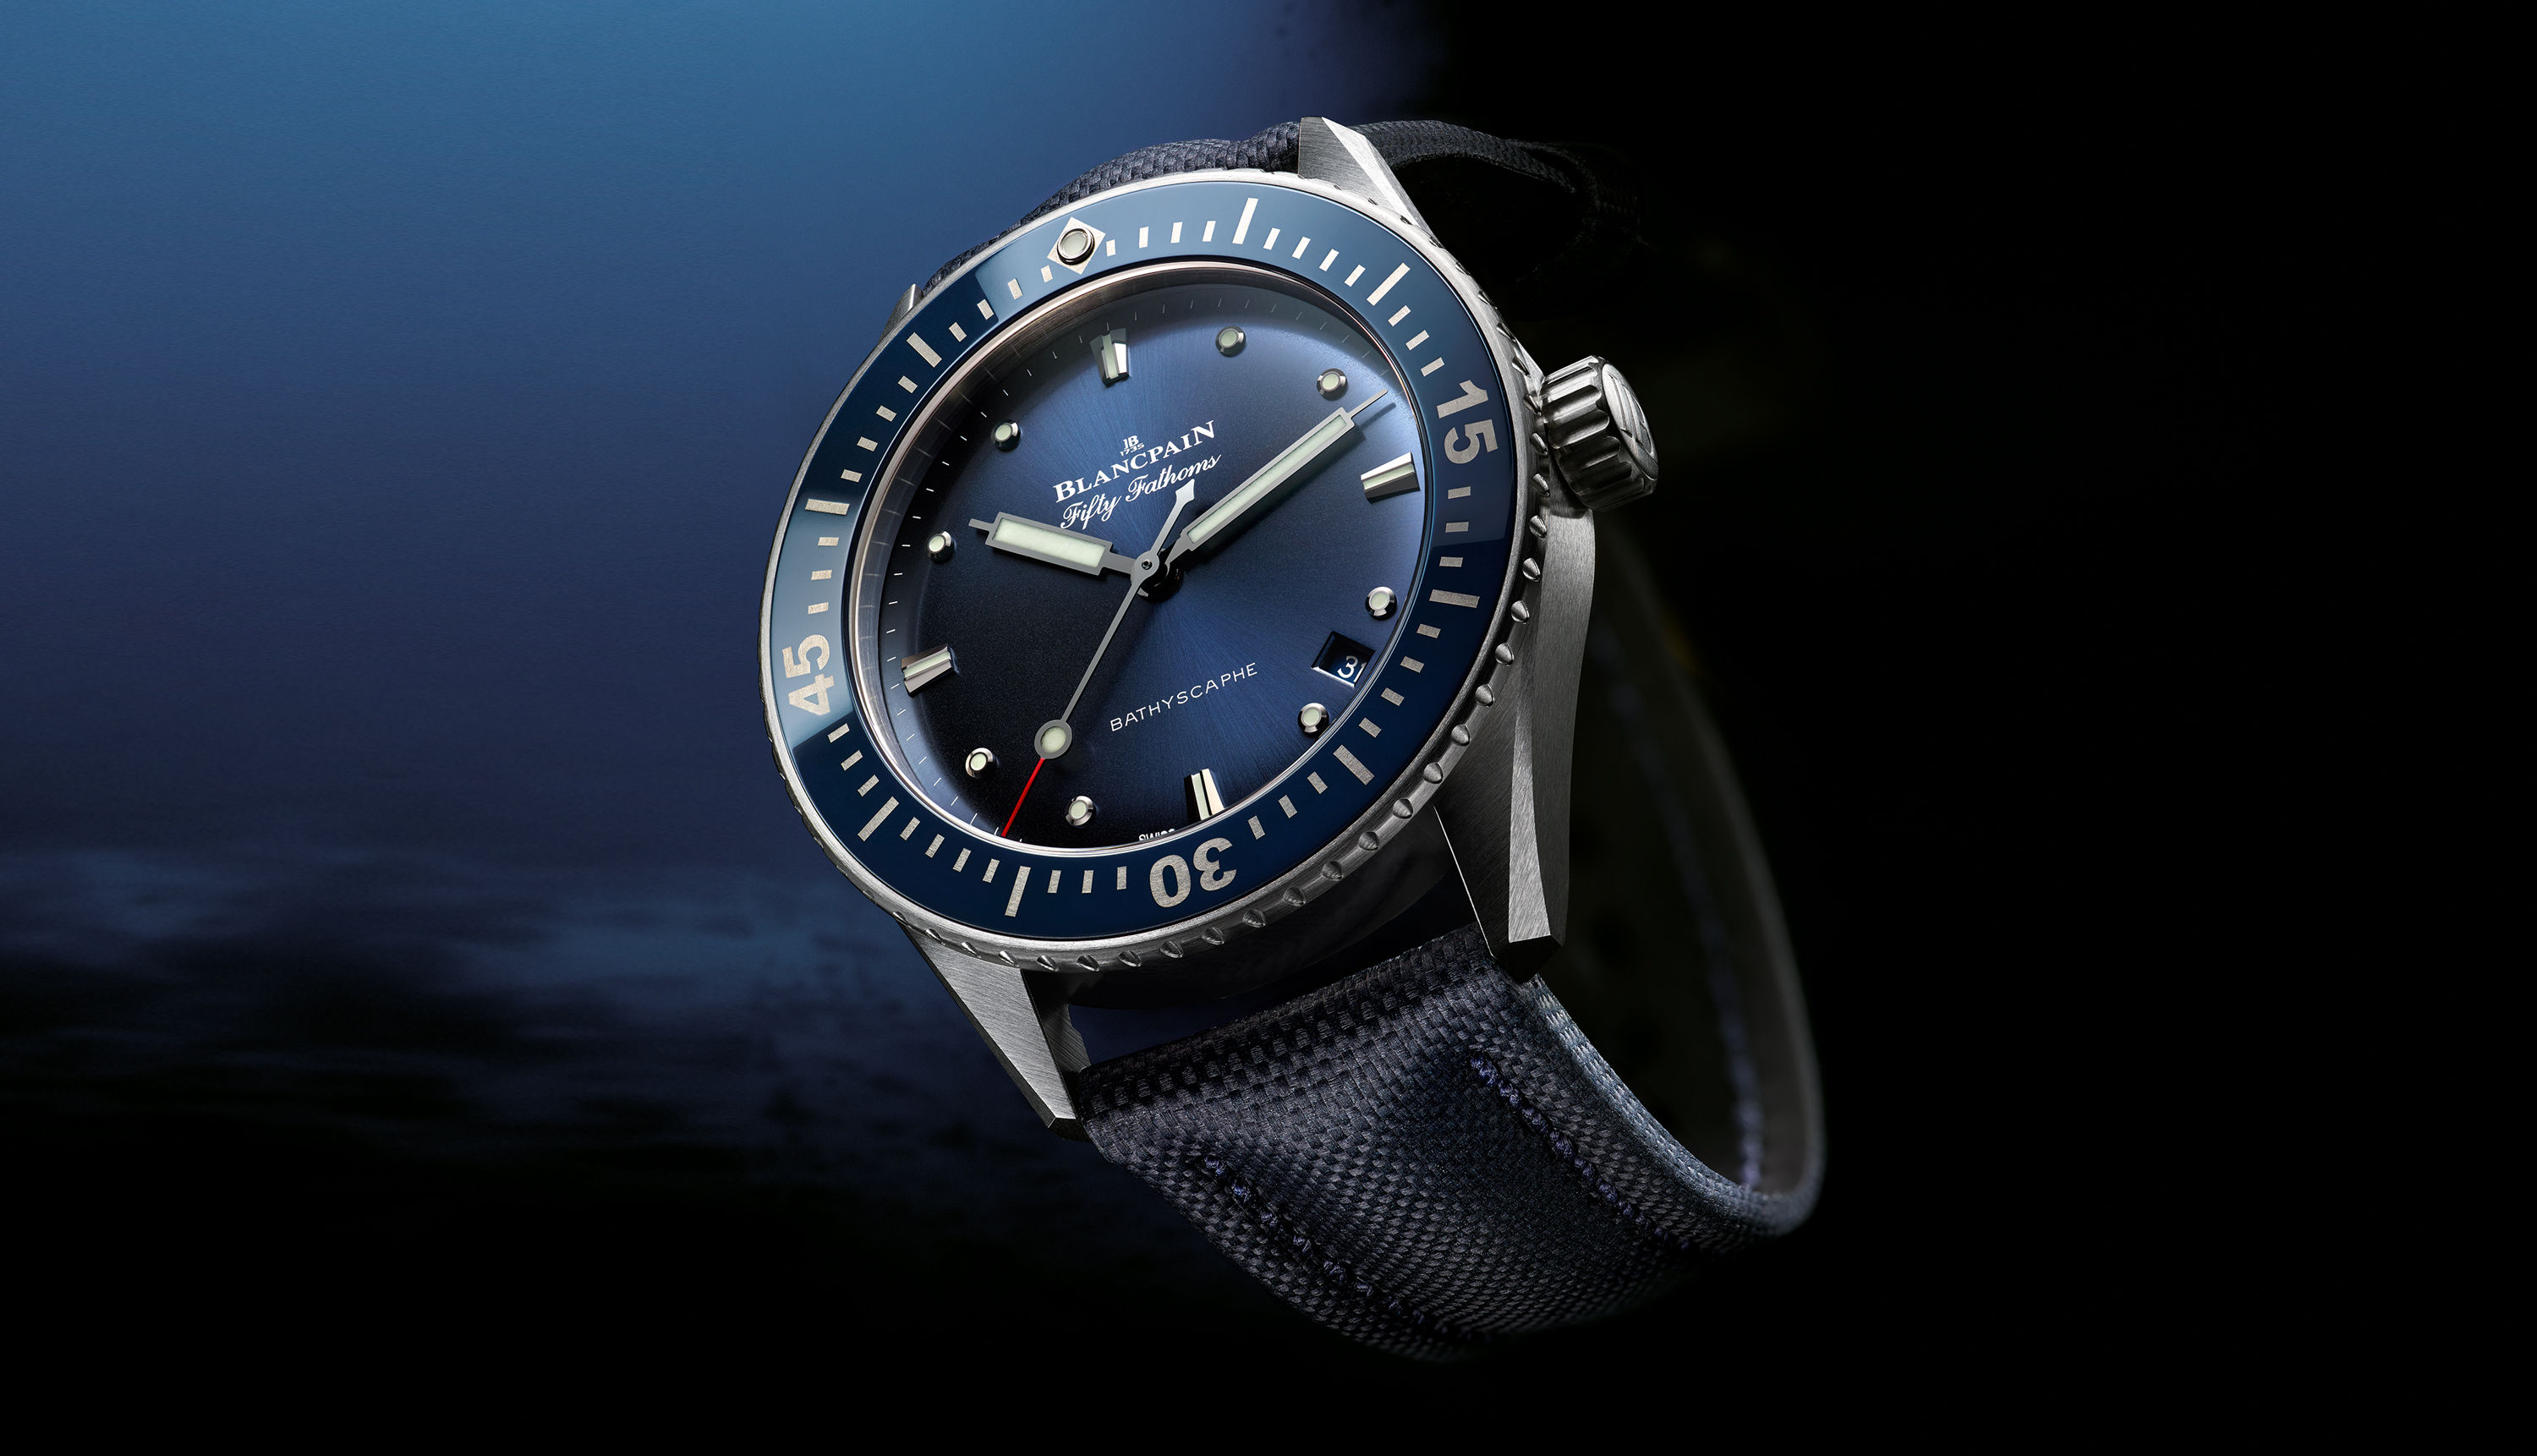 Blancpain’s Fifty Fathoms is the absolute pioneer in diving watches